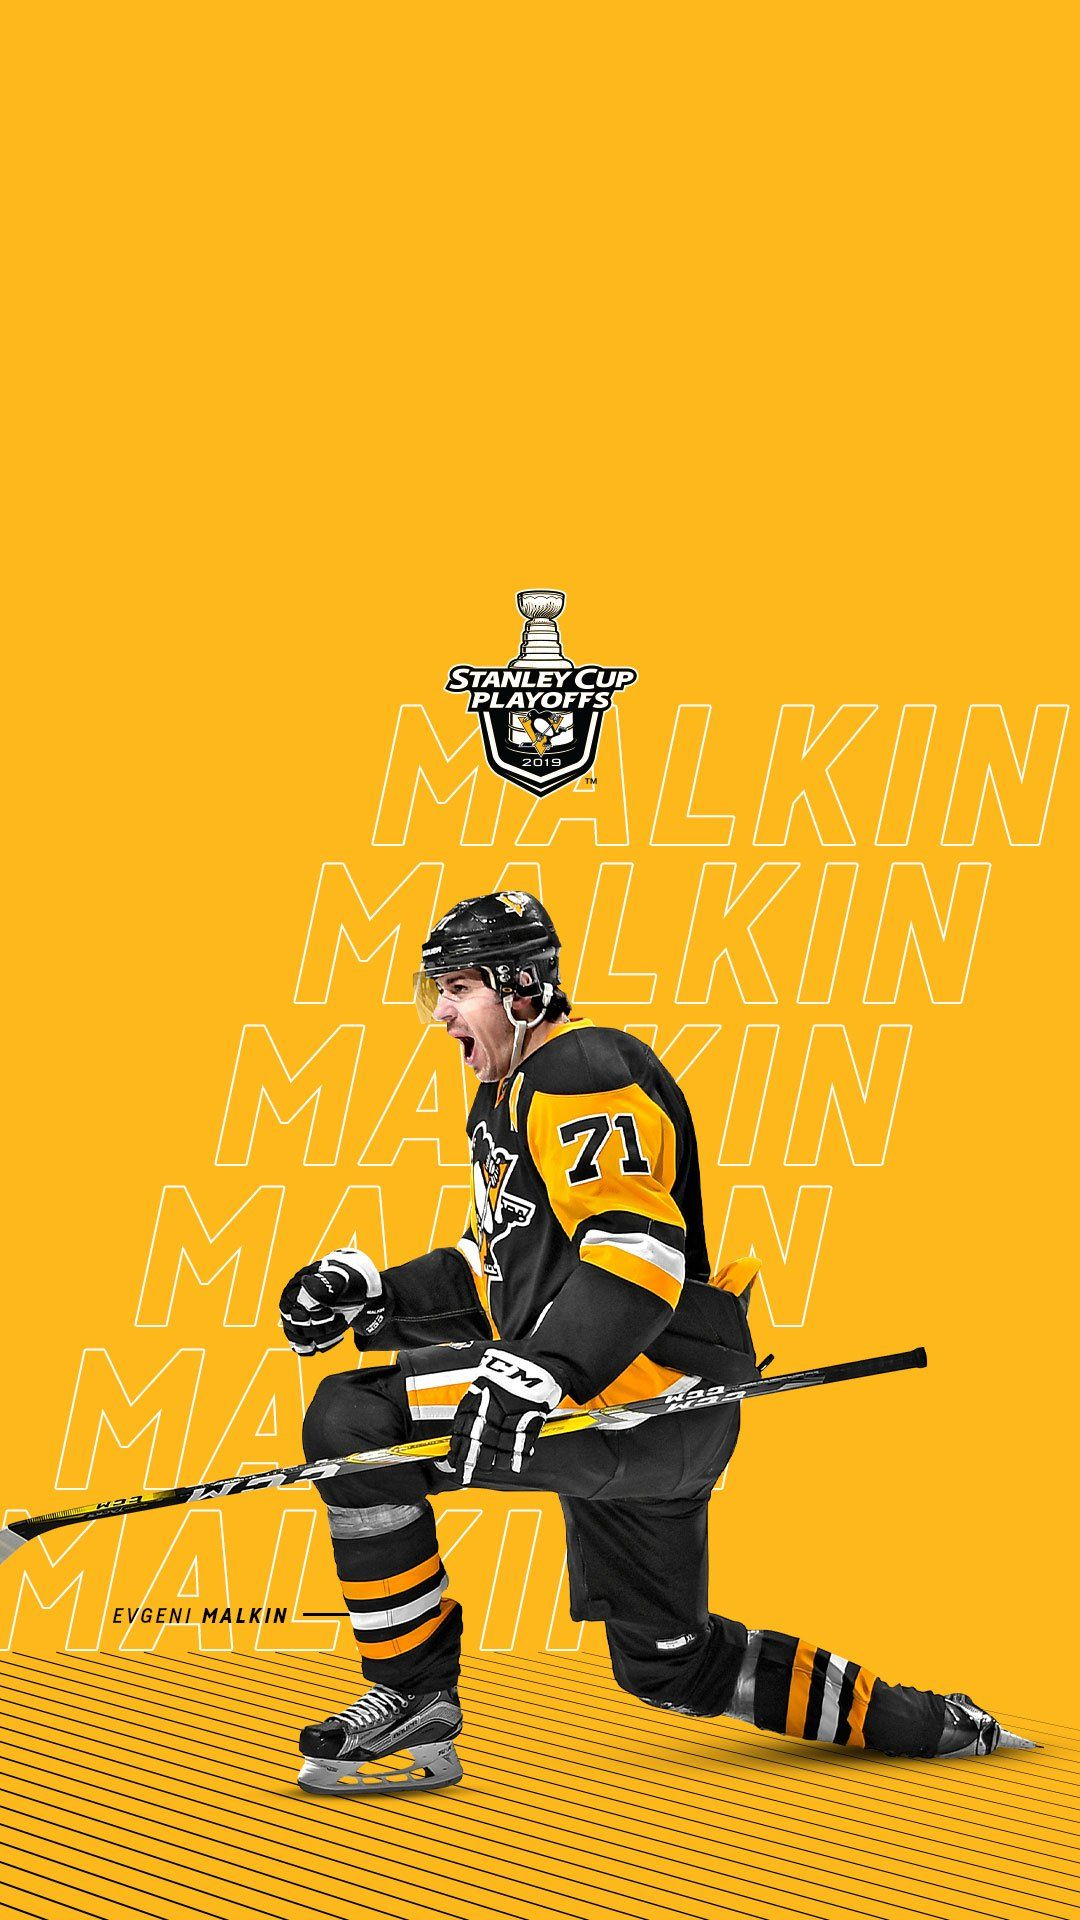 1080x1920 Pittsburgh Penguins on Twitter | Pittsburgh penguins wallpaper, Pittsburgh penguins, Nhl pittsburgh penguins